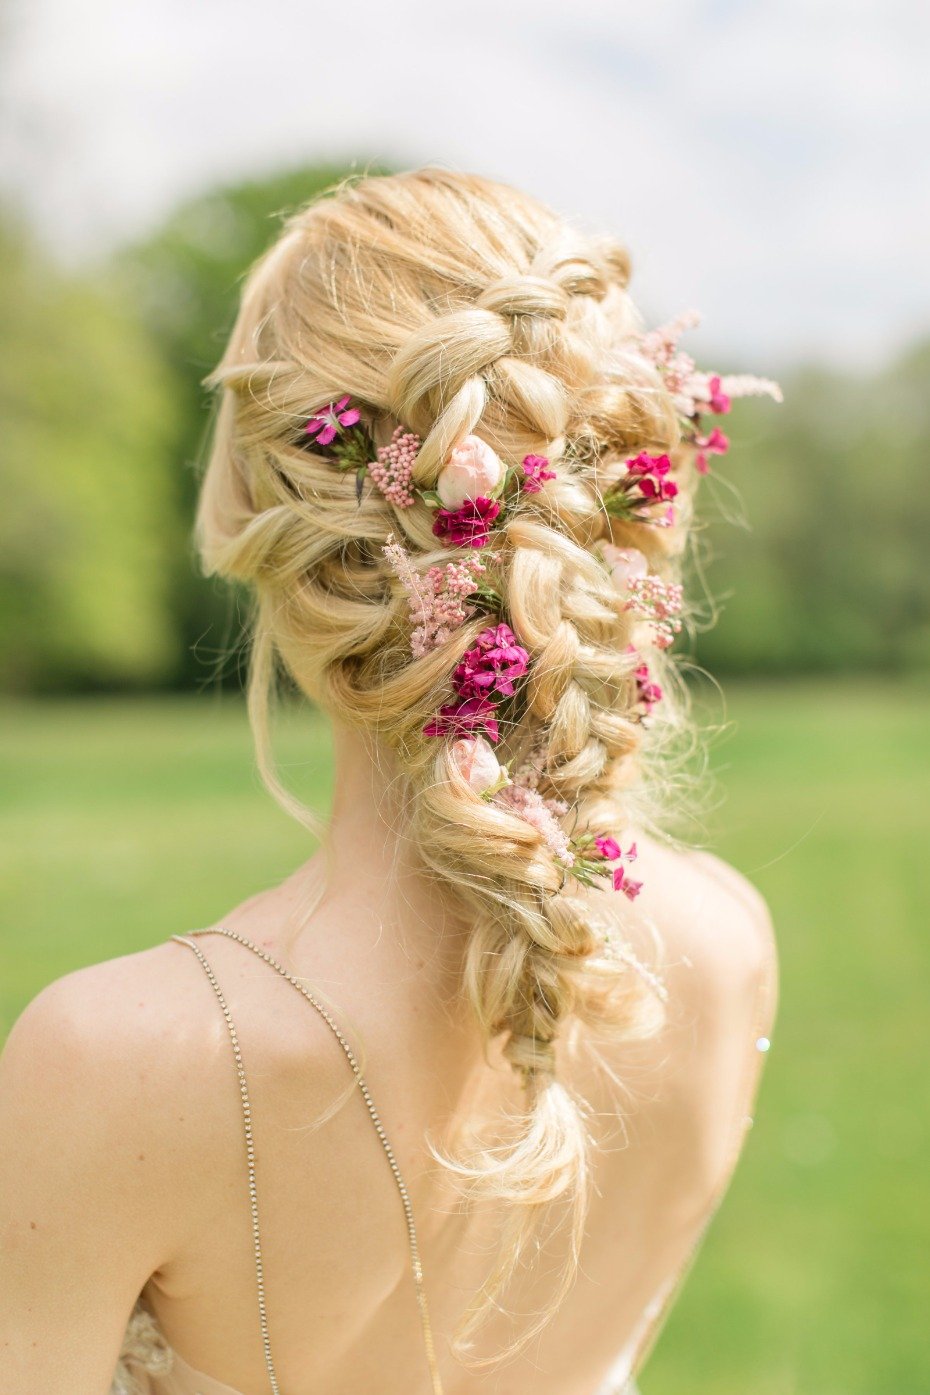 Braided hair with flowers